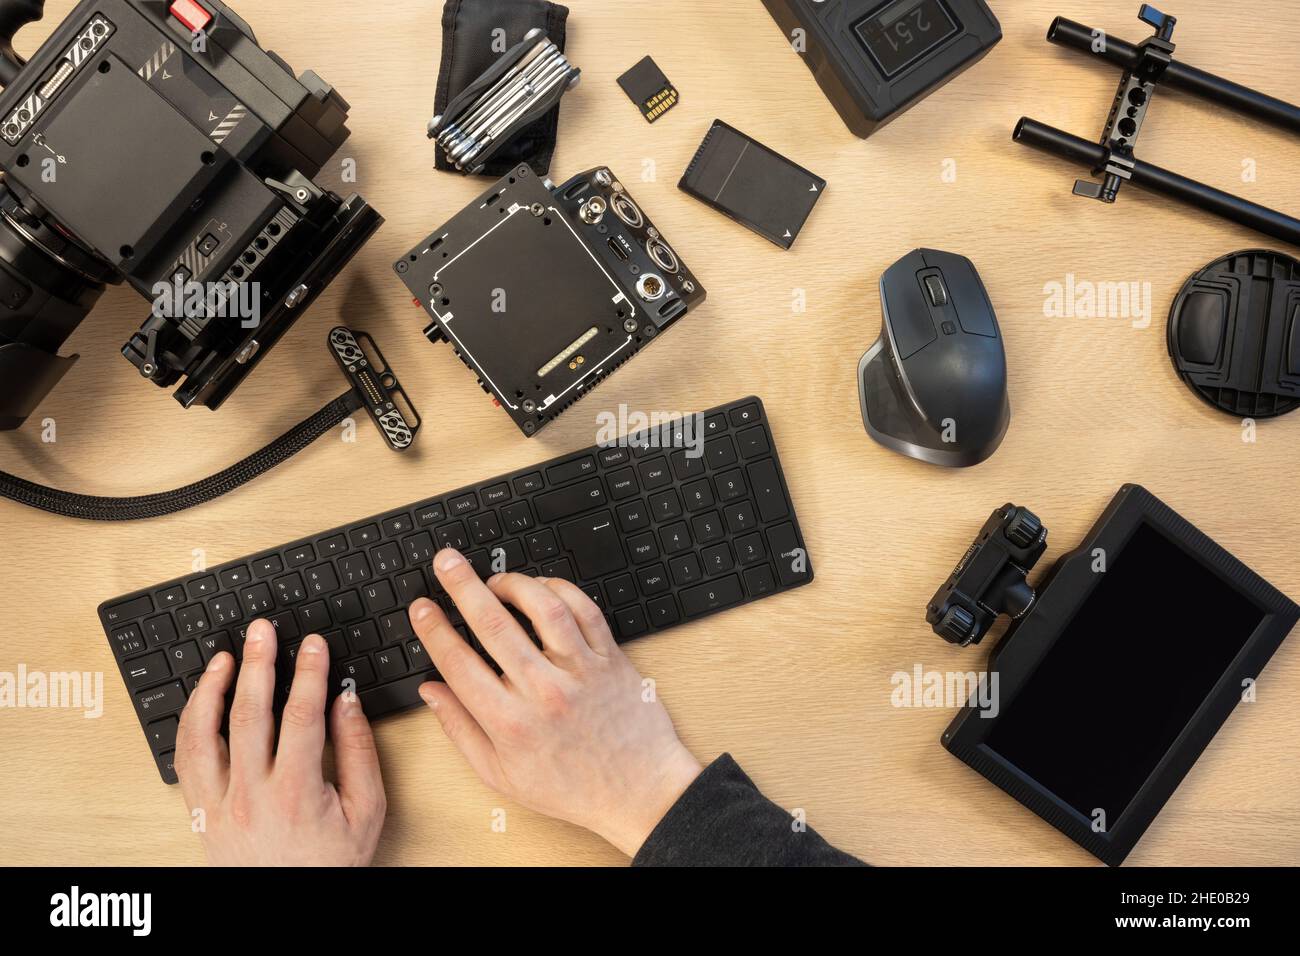 Man typing on computer keyboard by filming equipment at table Stock Photo